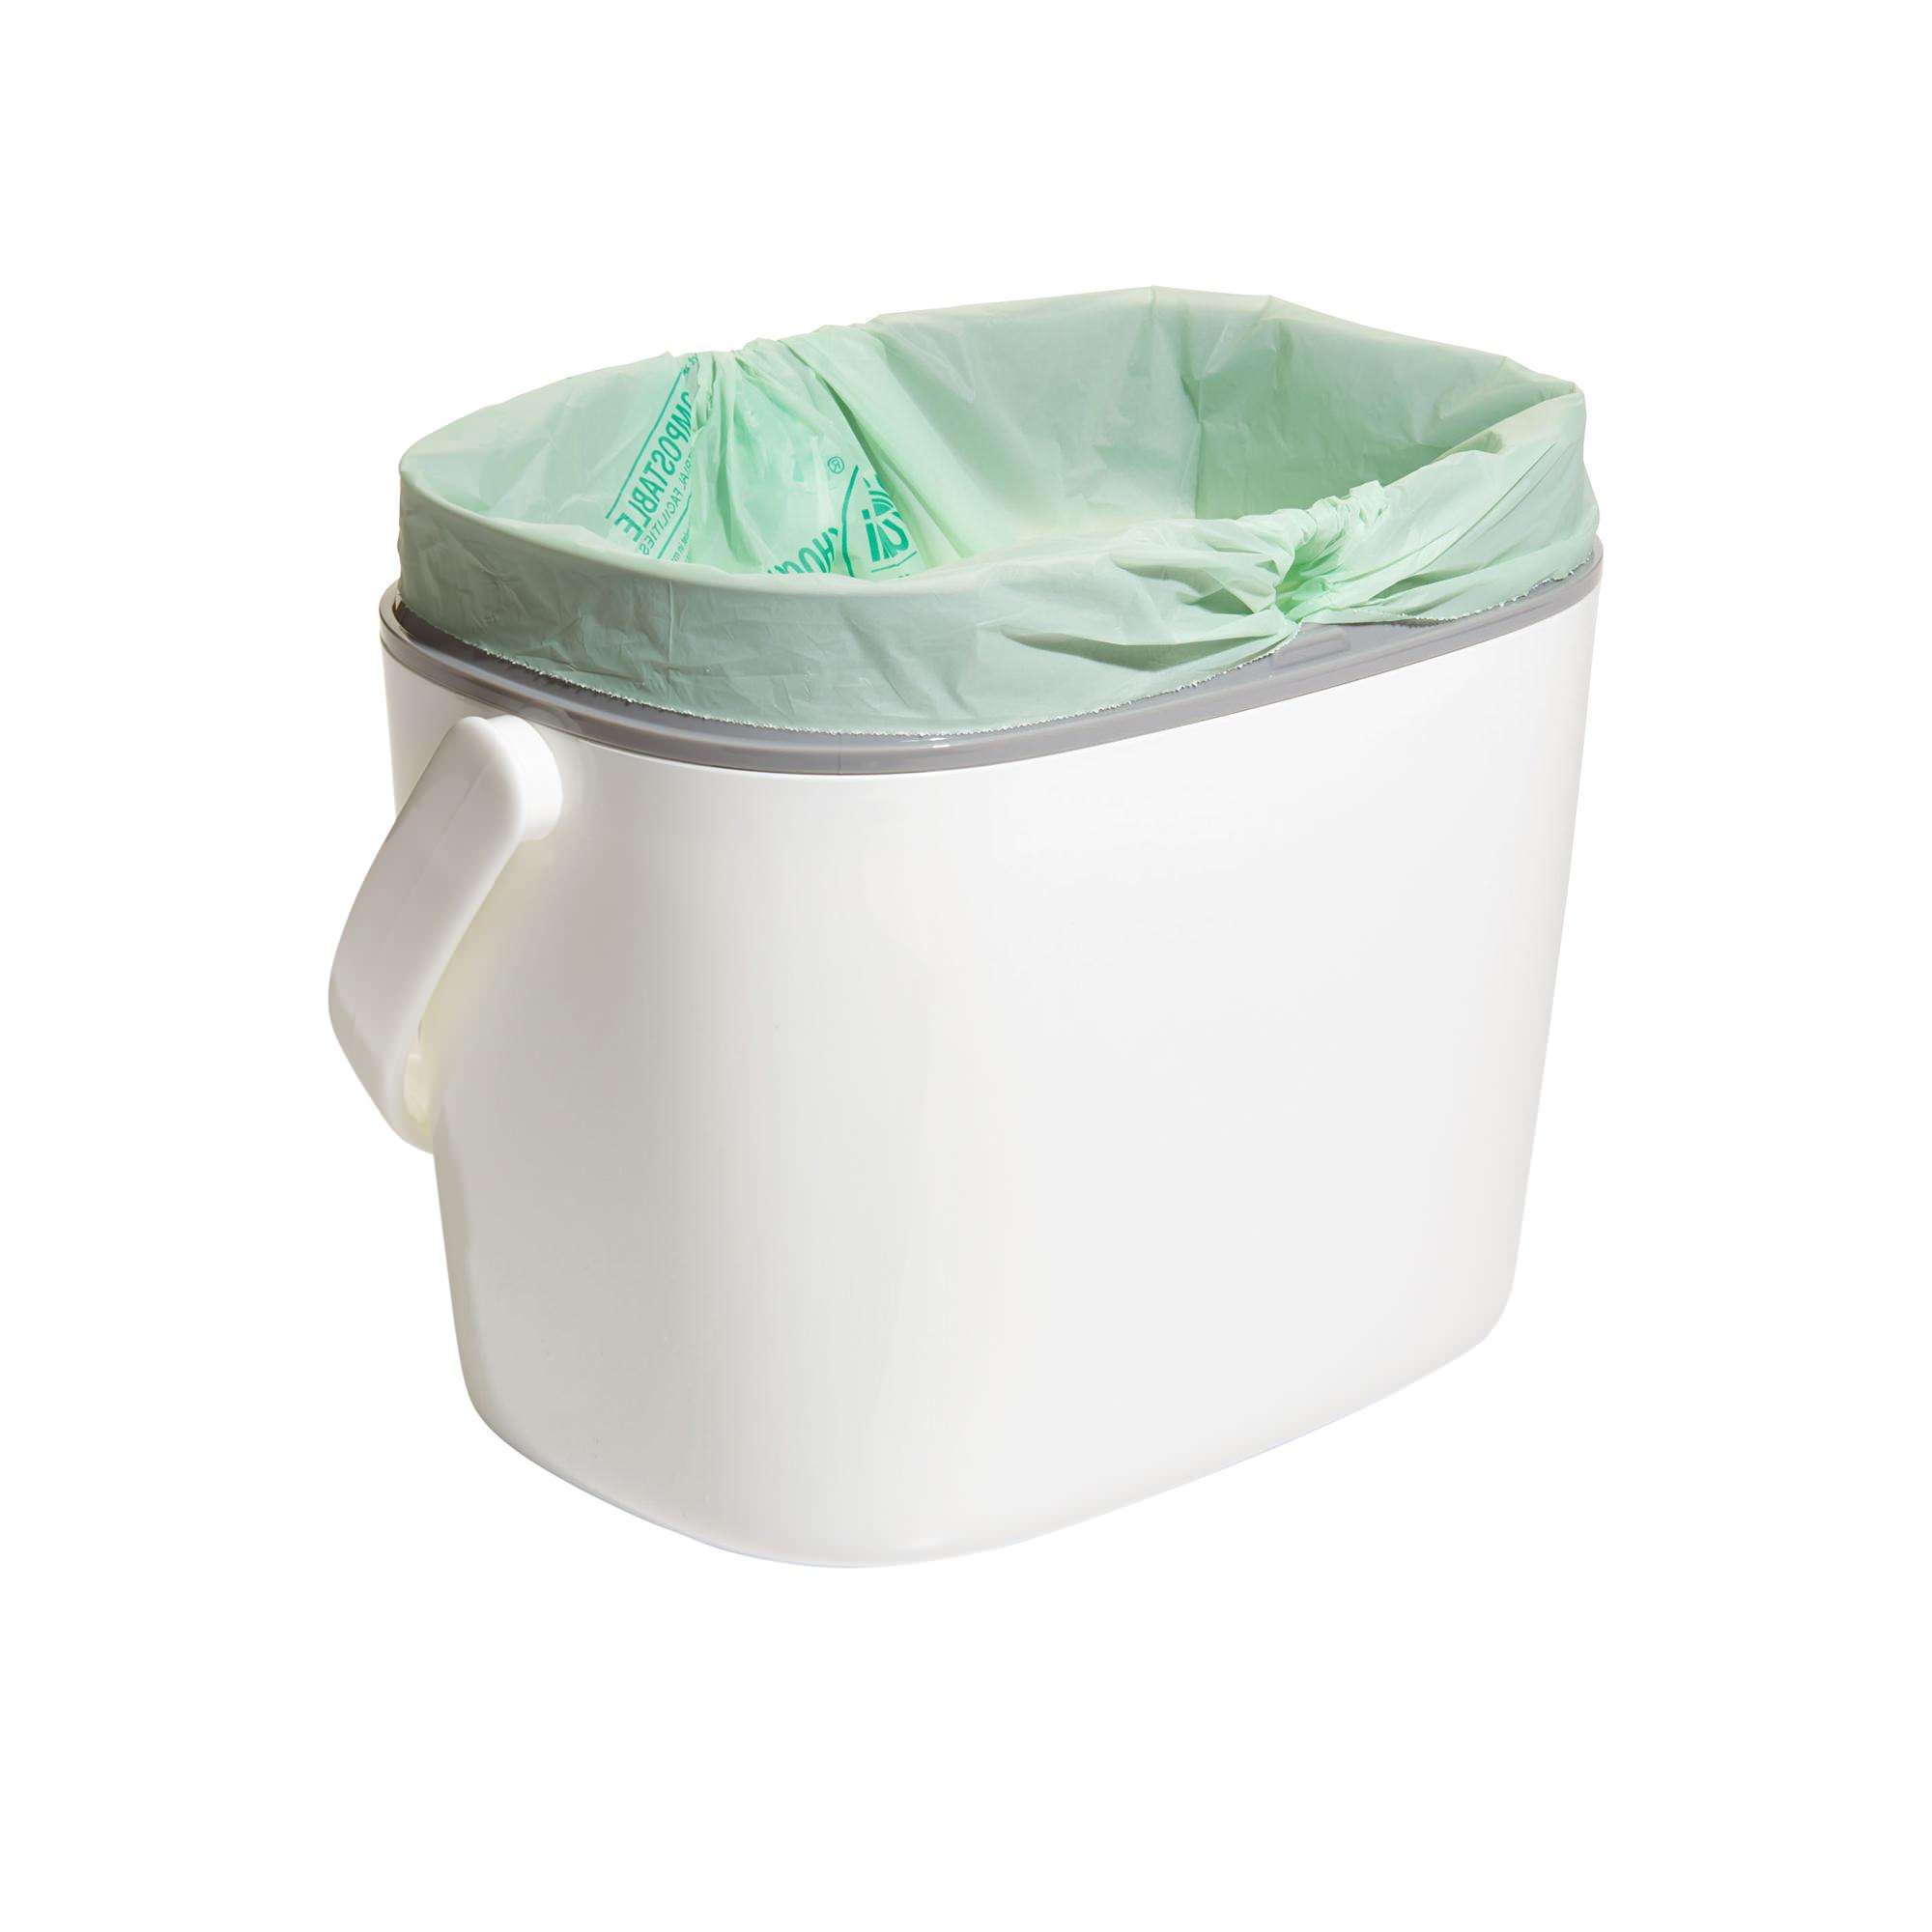 OXO Good Grips Easy Clean Compost Bin 6.6L White Image 3